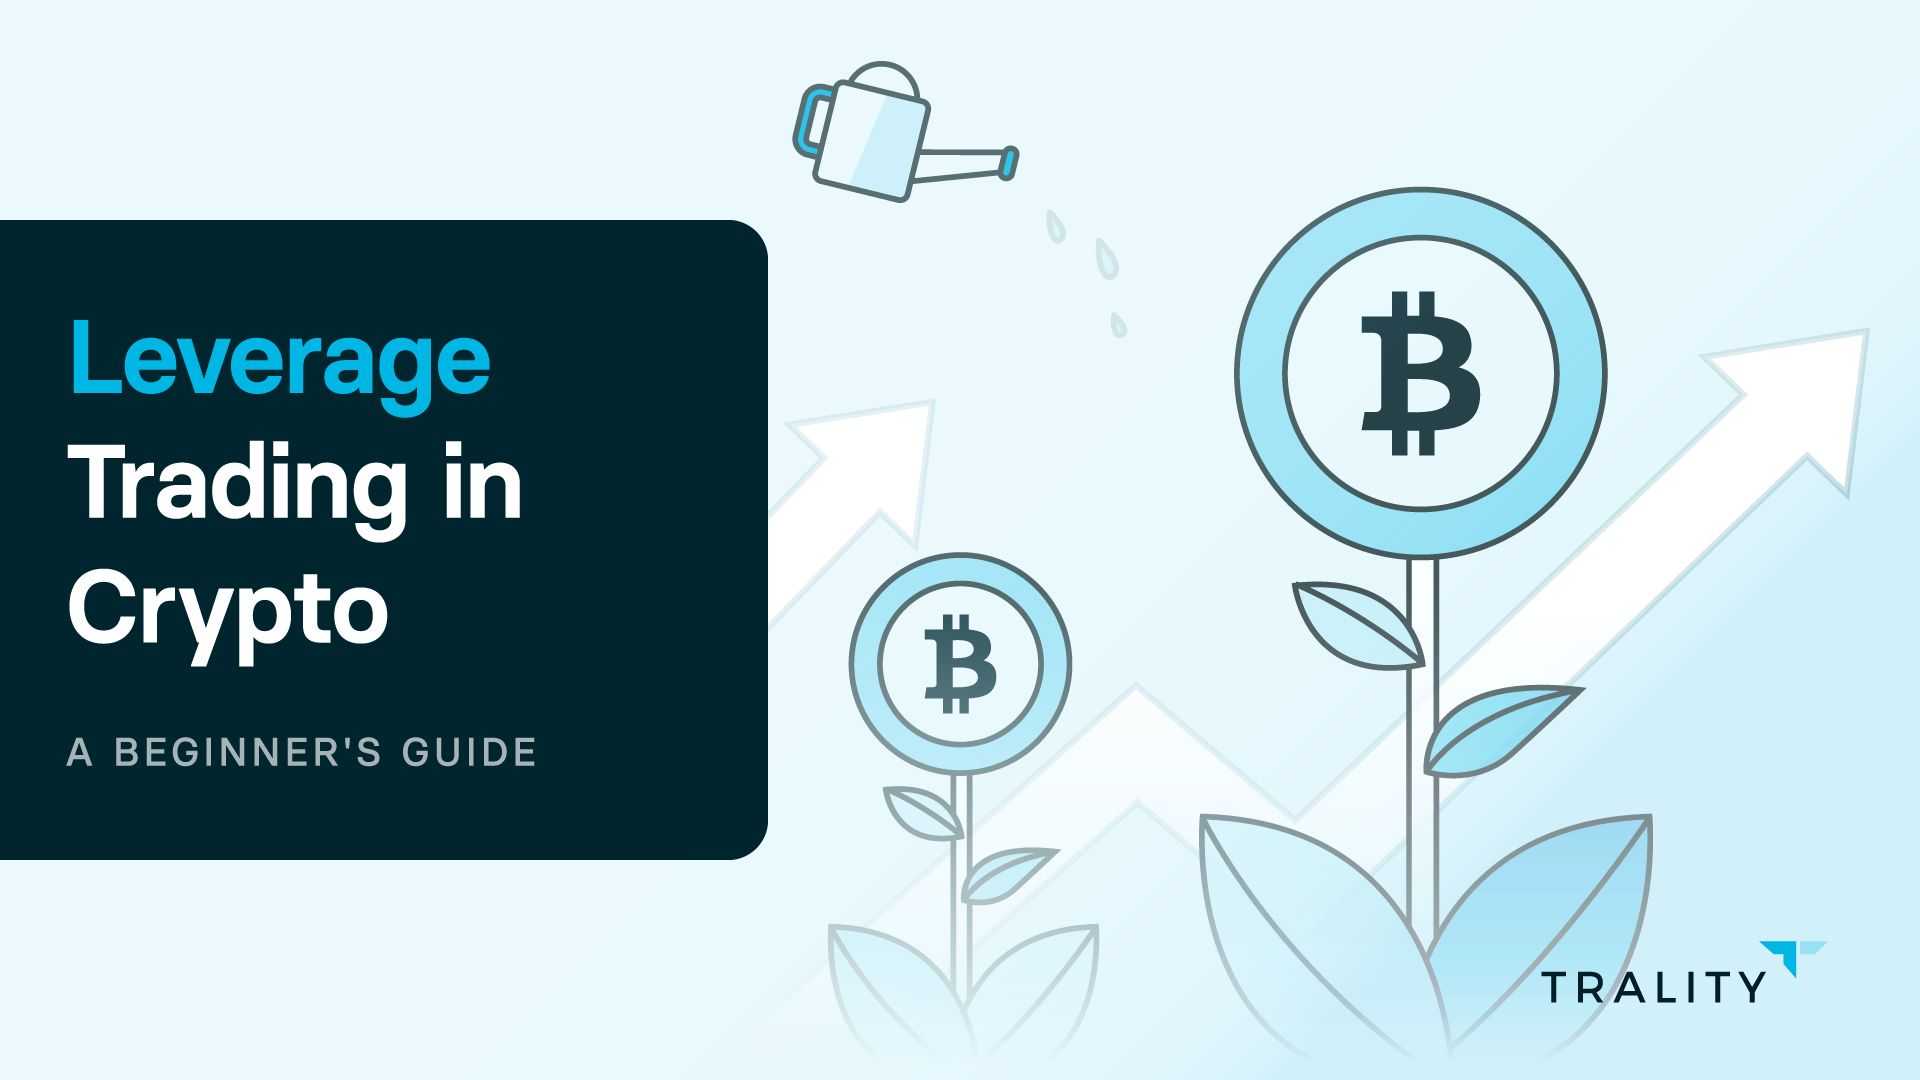 Leverage Trading in Crypto: A Beginner's Guide